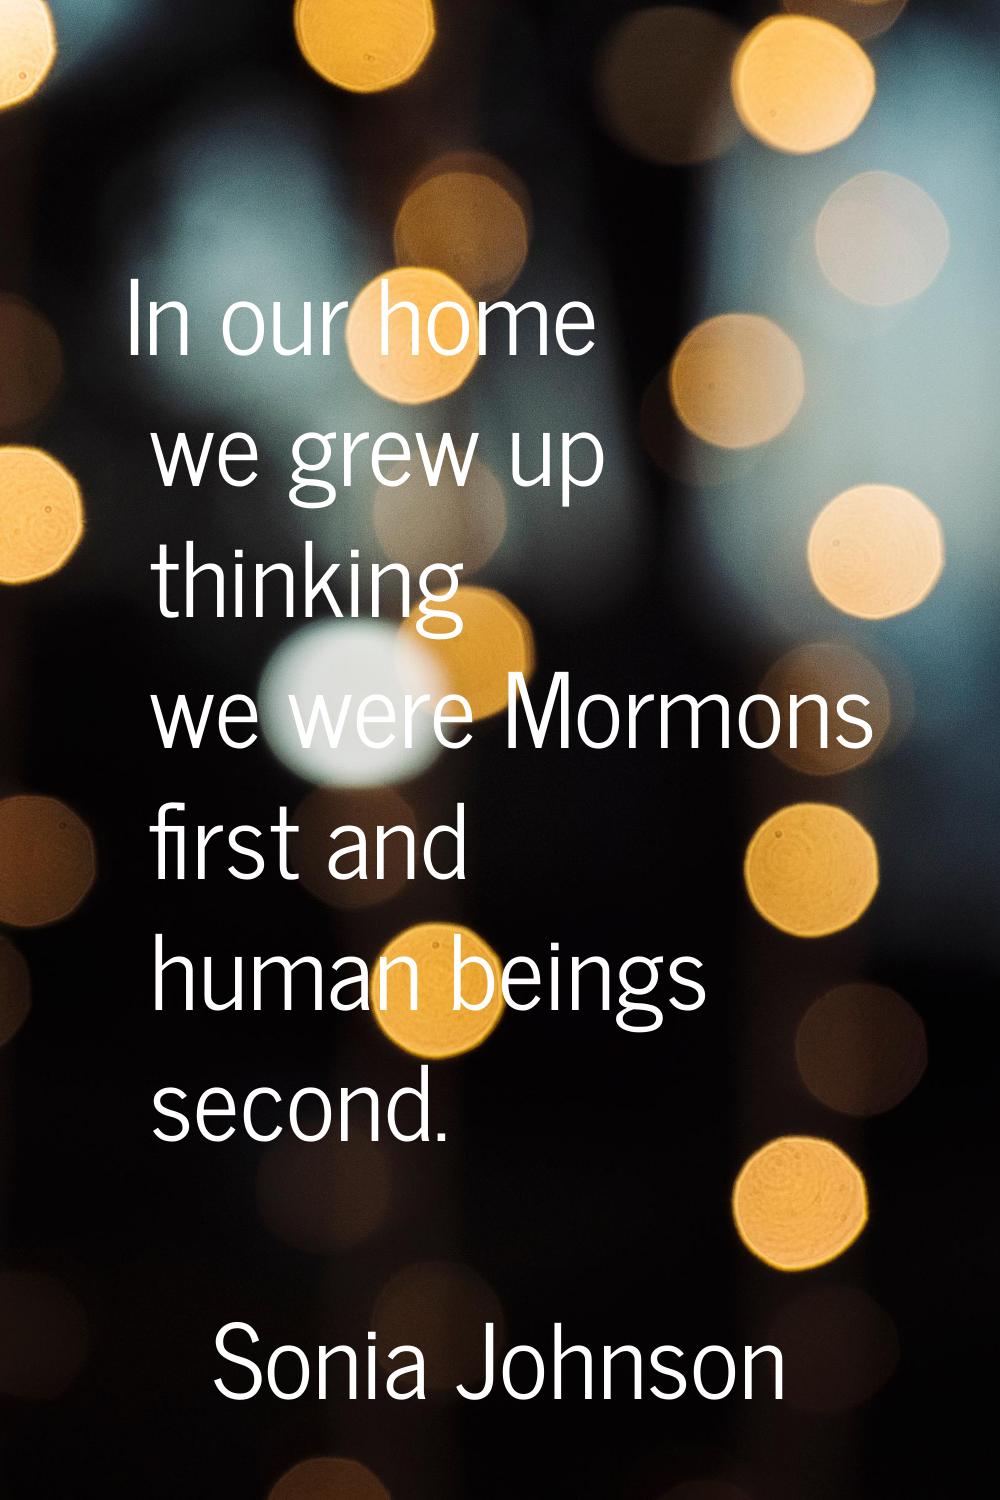 In our home we grew up thinking we were Mormons first and human beings second.